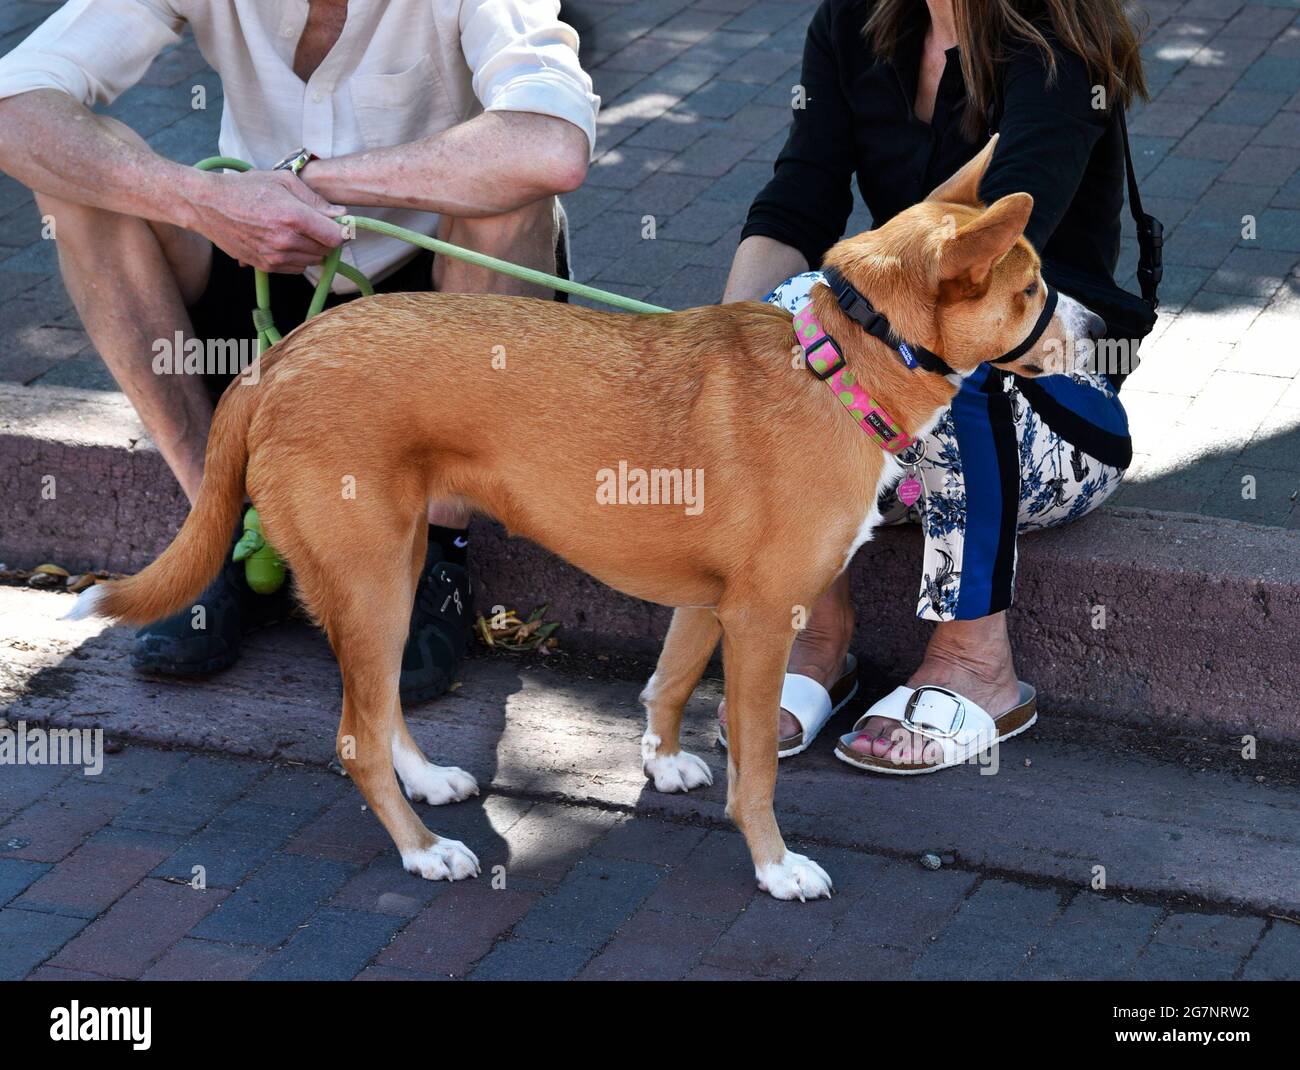 Tourists traveling with their pet dog relax by sitting in the shade on a curb in Santa Fe, New Mexico. Stock Photo